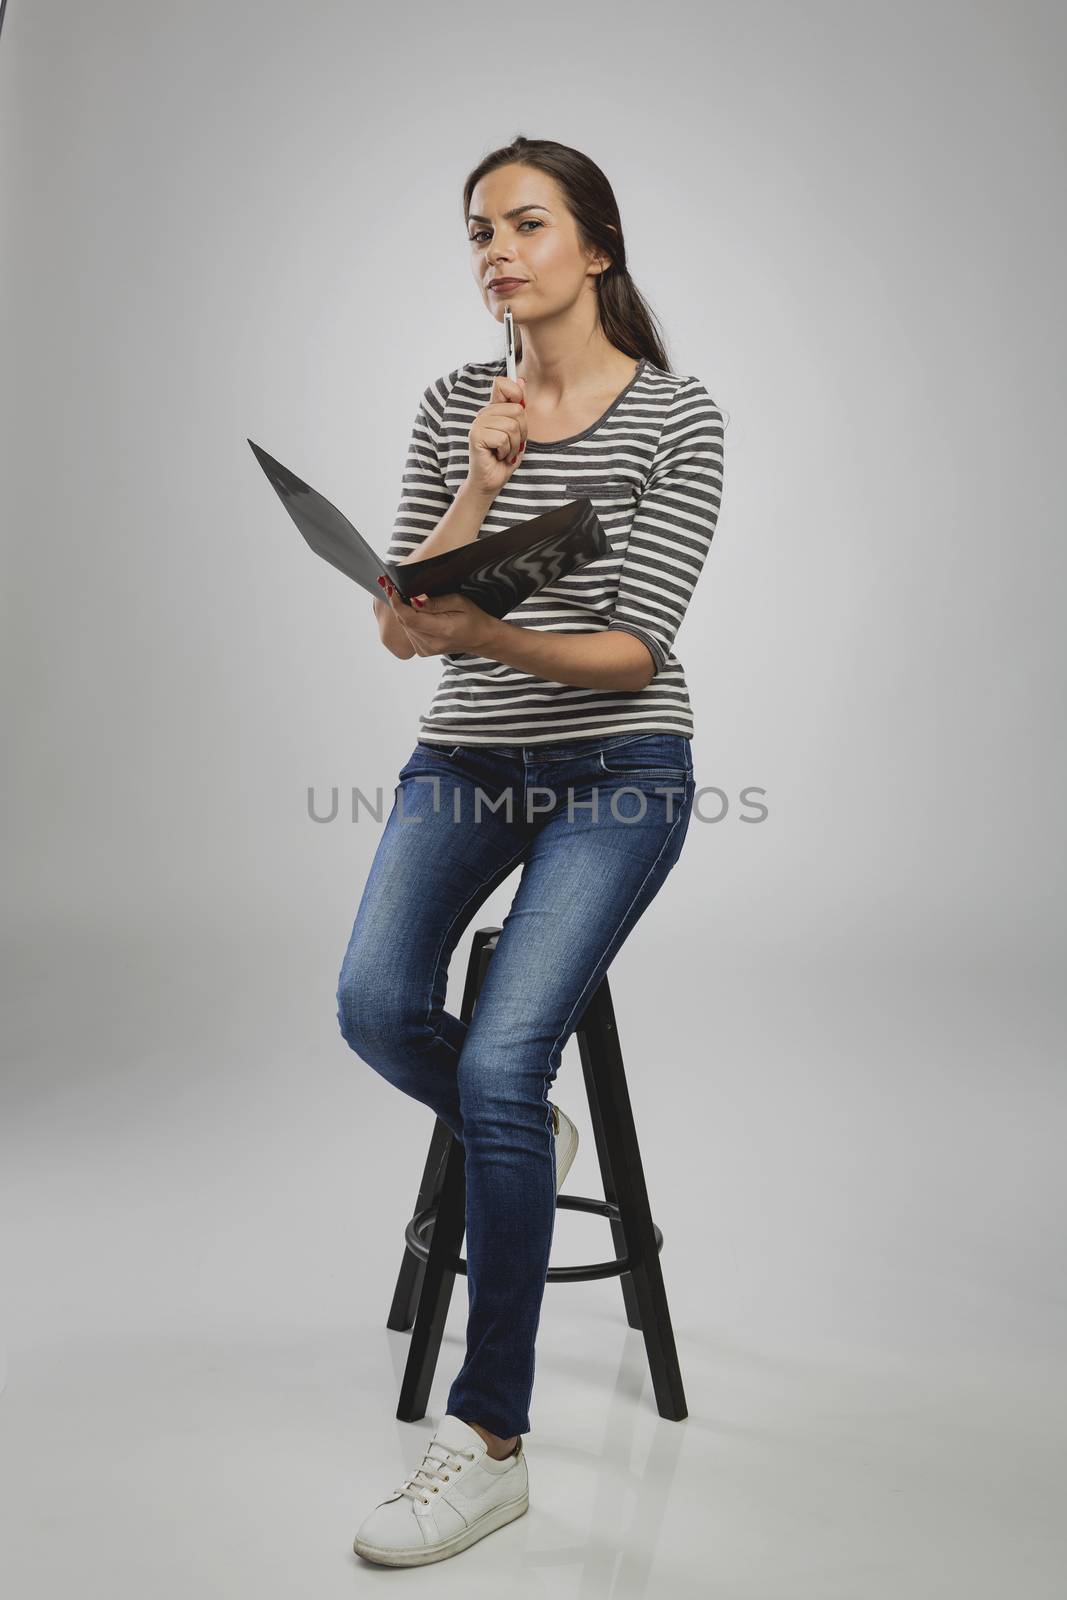 Beautiful woman sitting on a bench holding a folder and thinking







Woman sitting on a bench while think